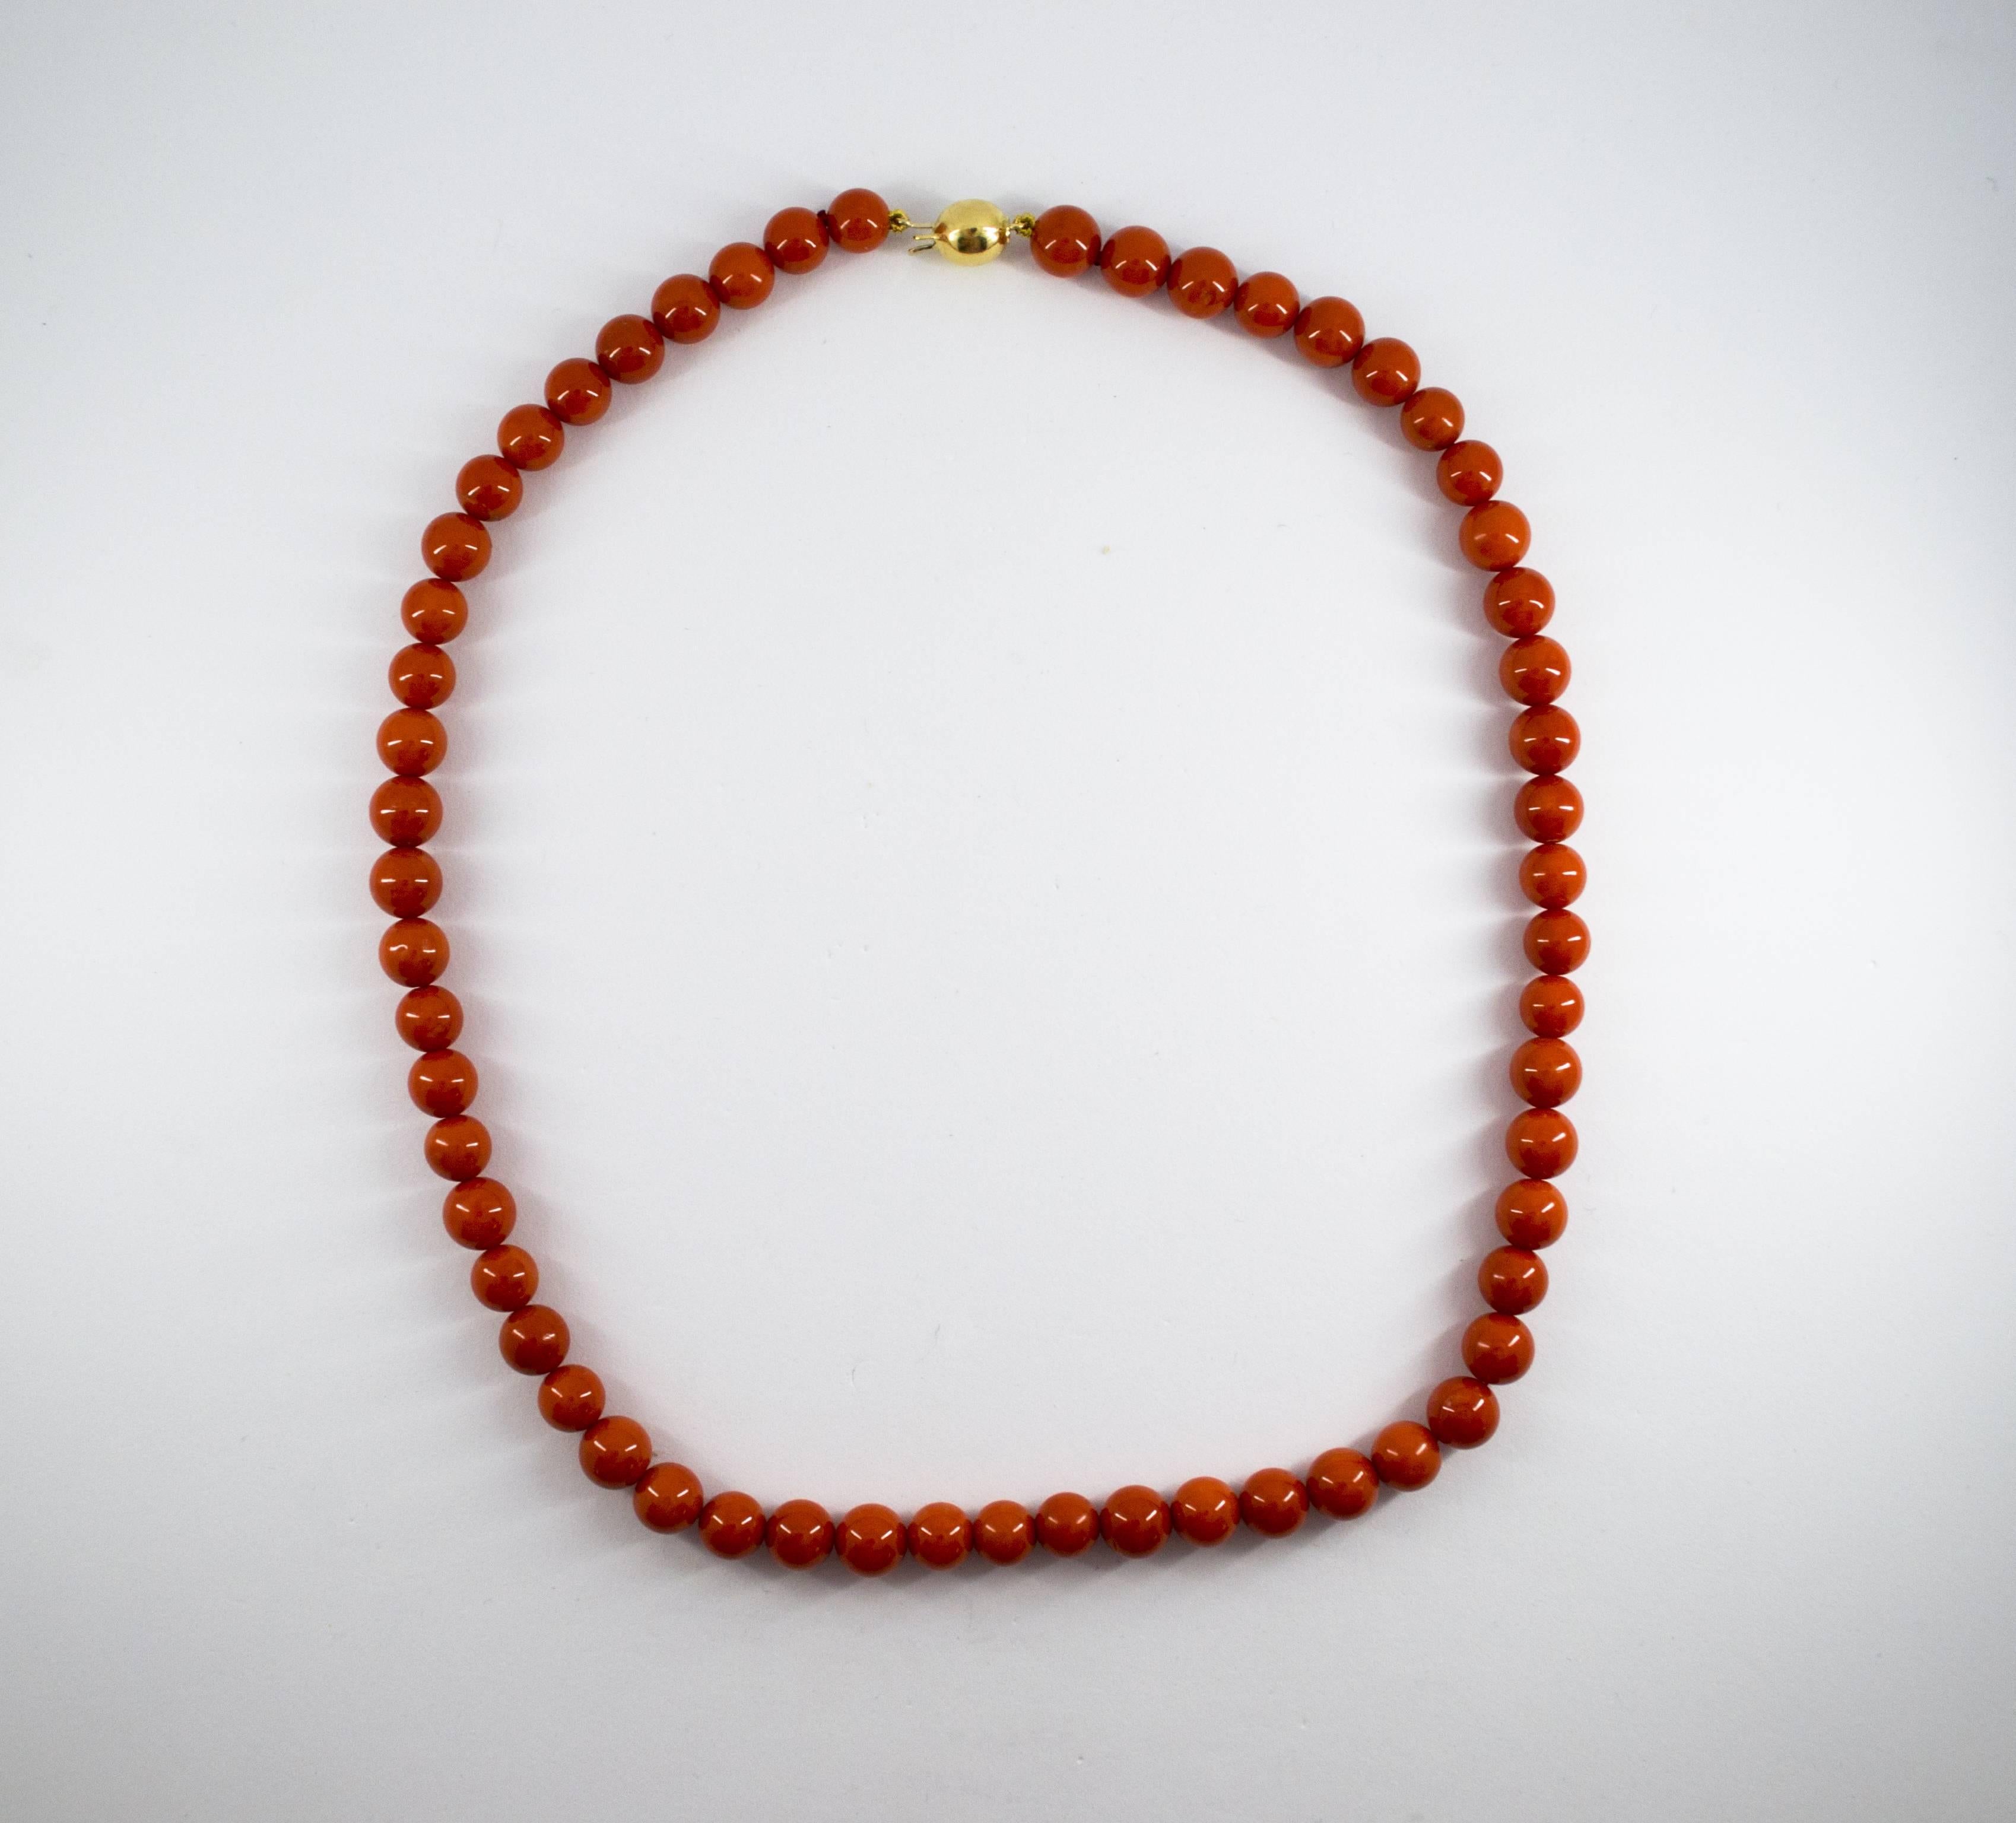 This Necklace is made of 18K Yellow Gold.
This Necklace has Mediterranean (Sardinia, Italy) Red Coral.
The circumference of the Beads ranges from 7.5mm to 8.5mm.
We're a workshop so every piece is handmade, customizable and resizable.